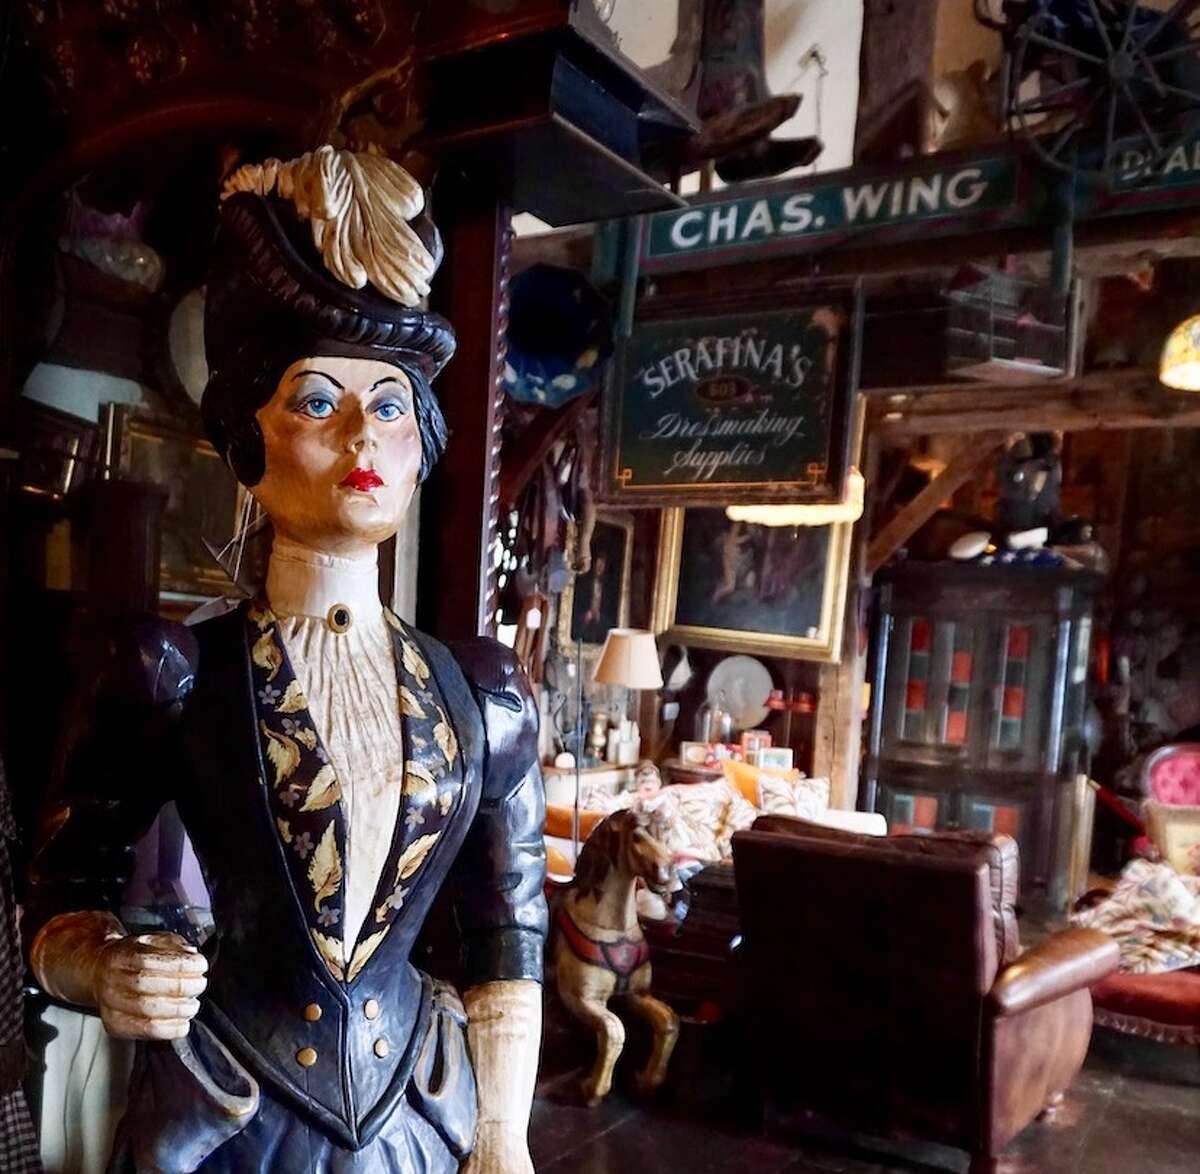 A curious mix of antiques adds to the intrigue of Wing's Castle.